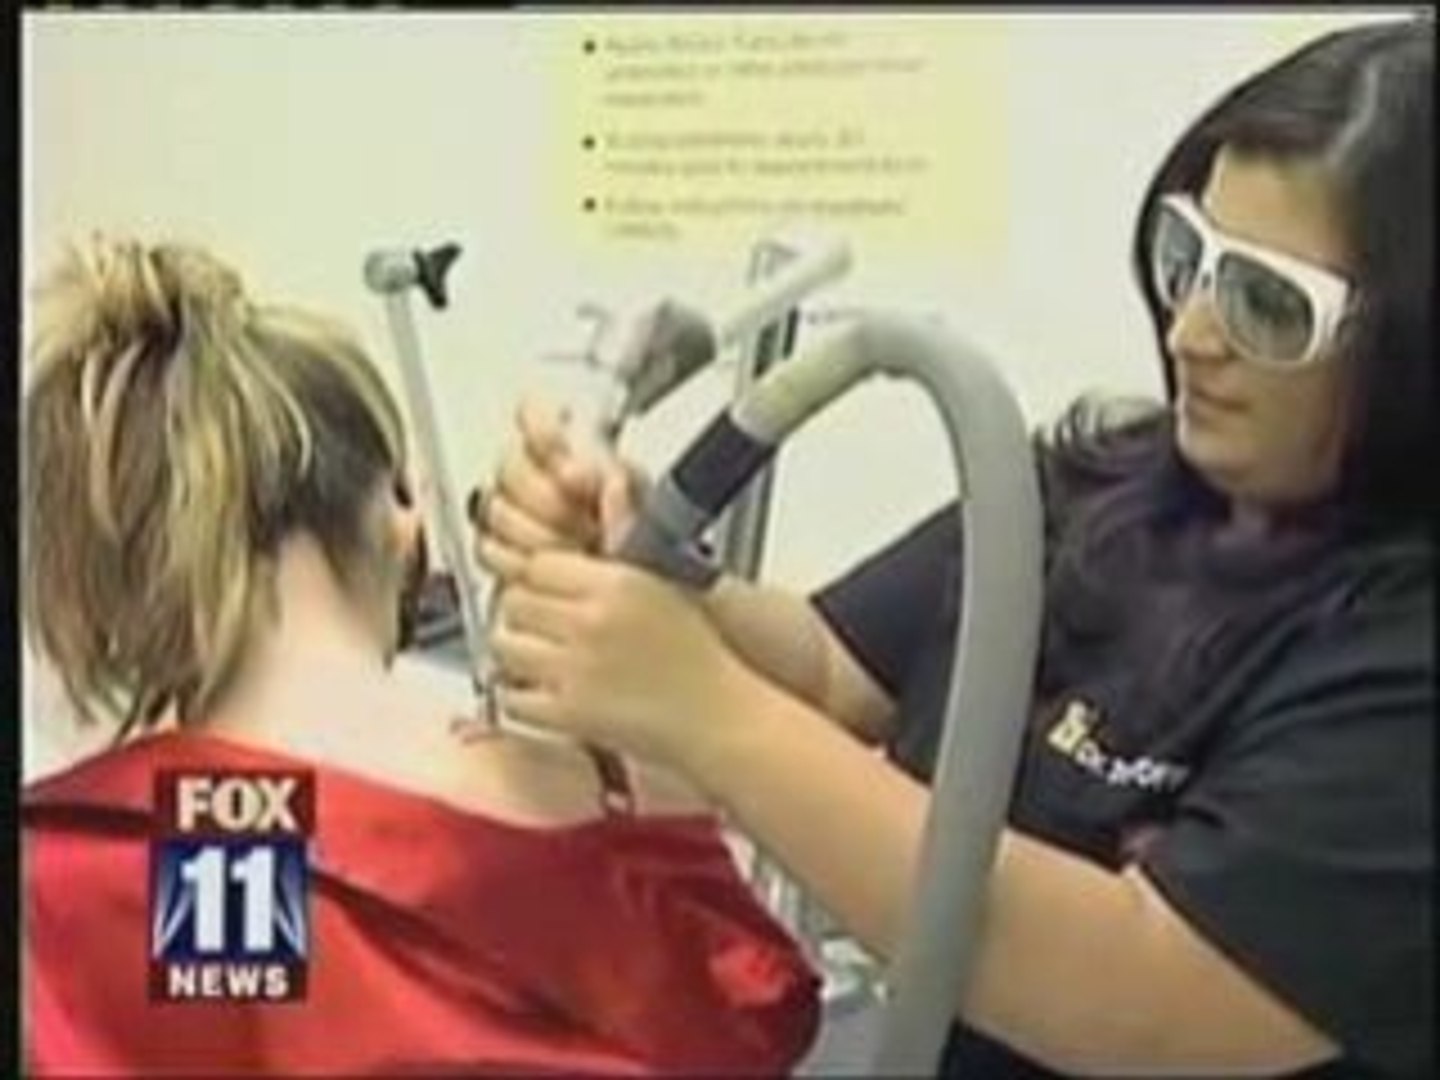 Laser tattoo removal in the news - US Marine Corp